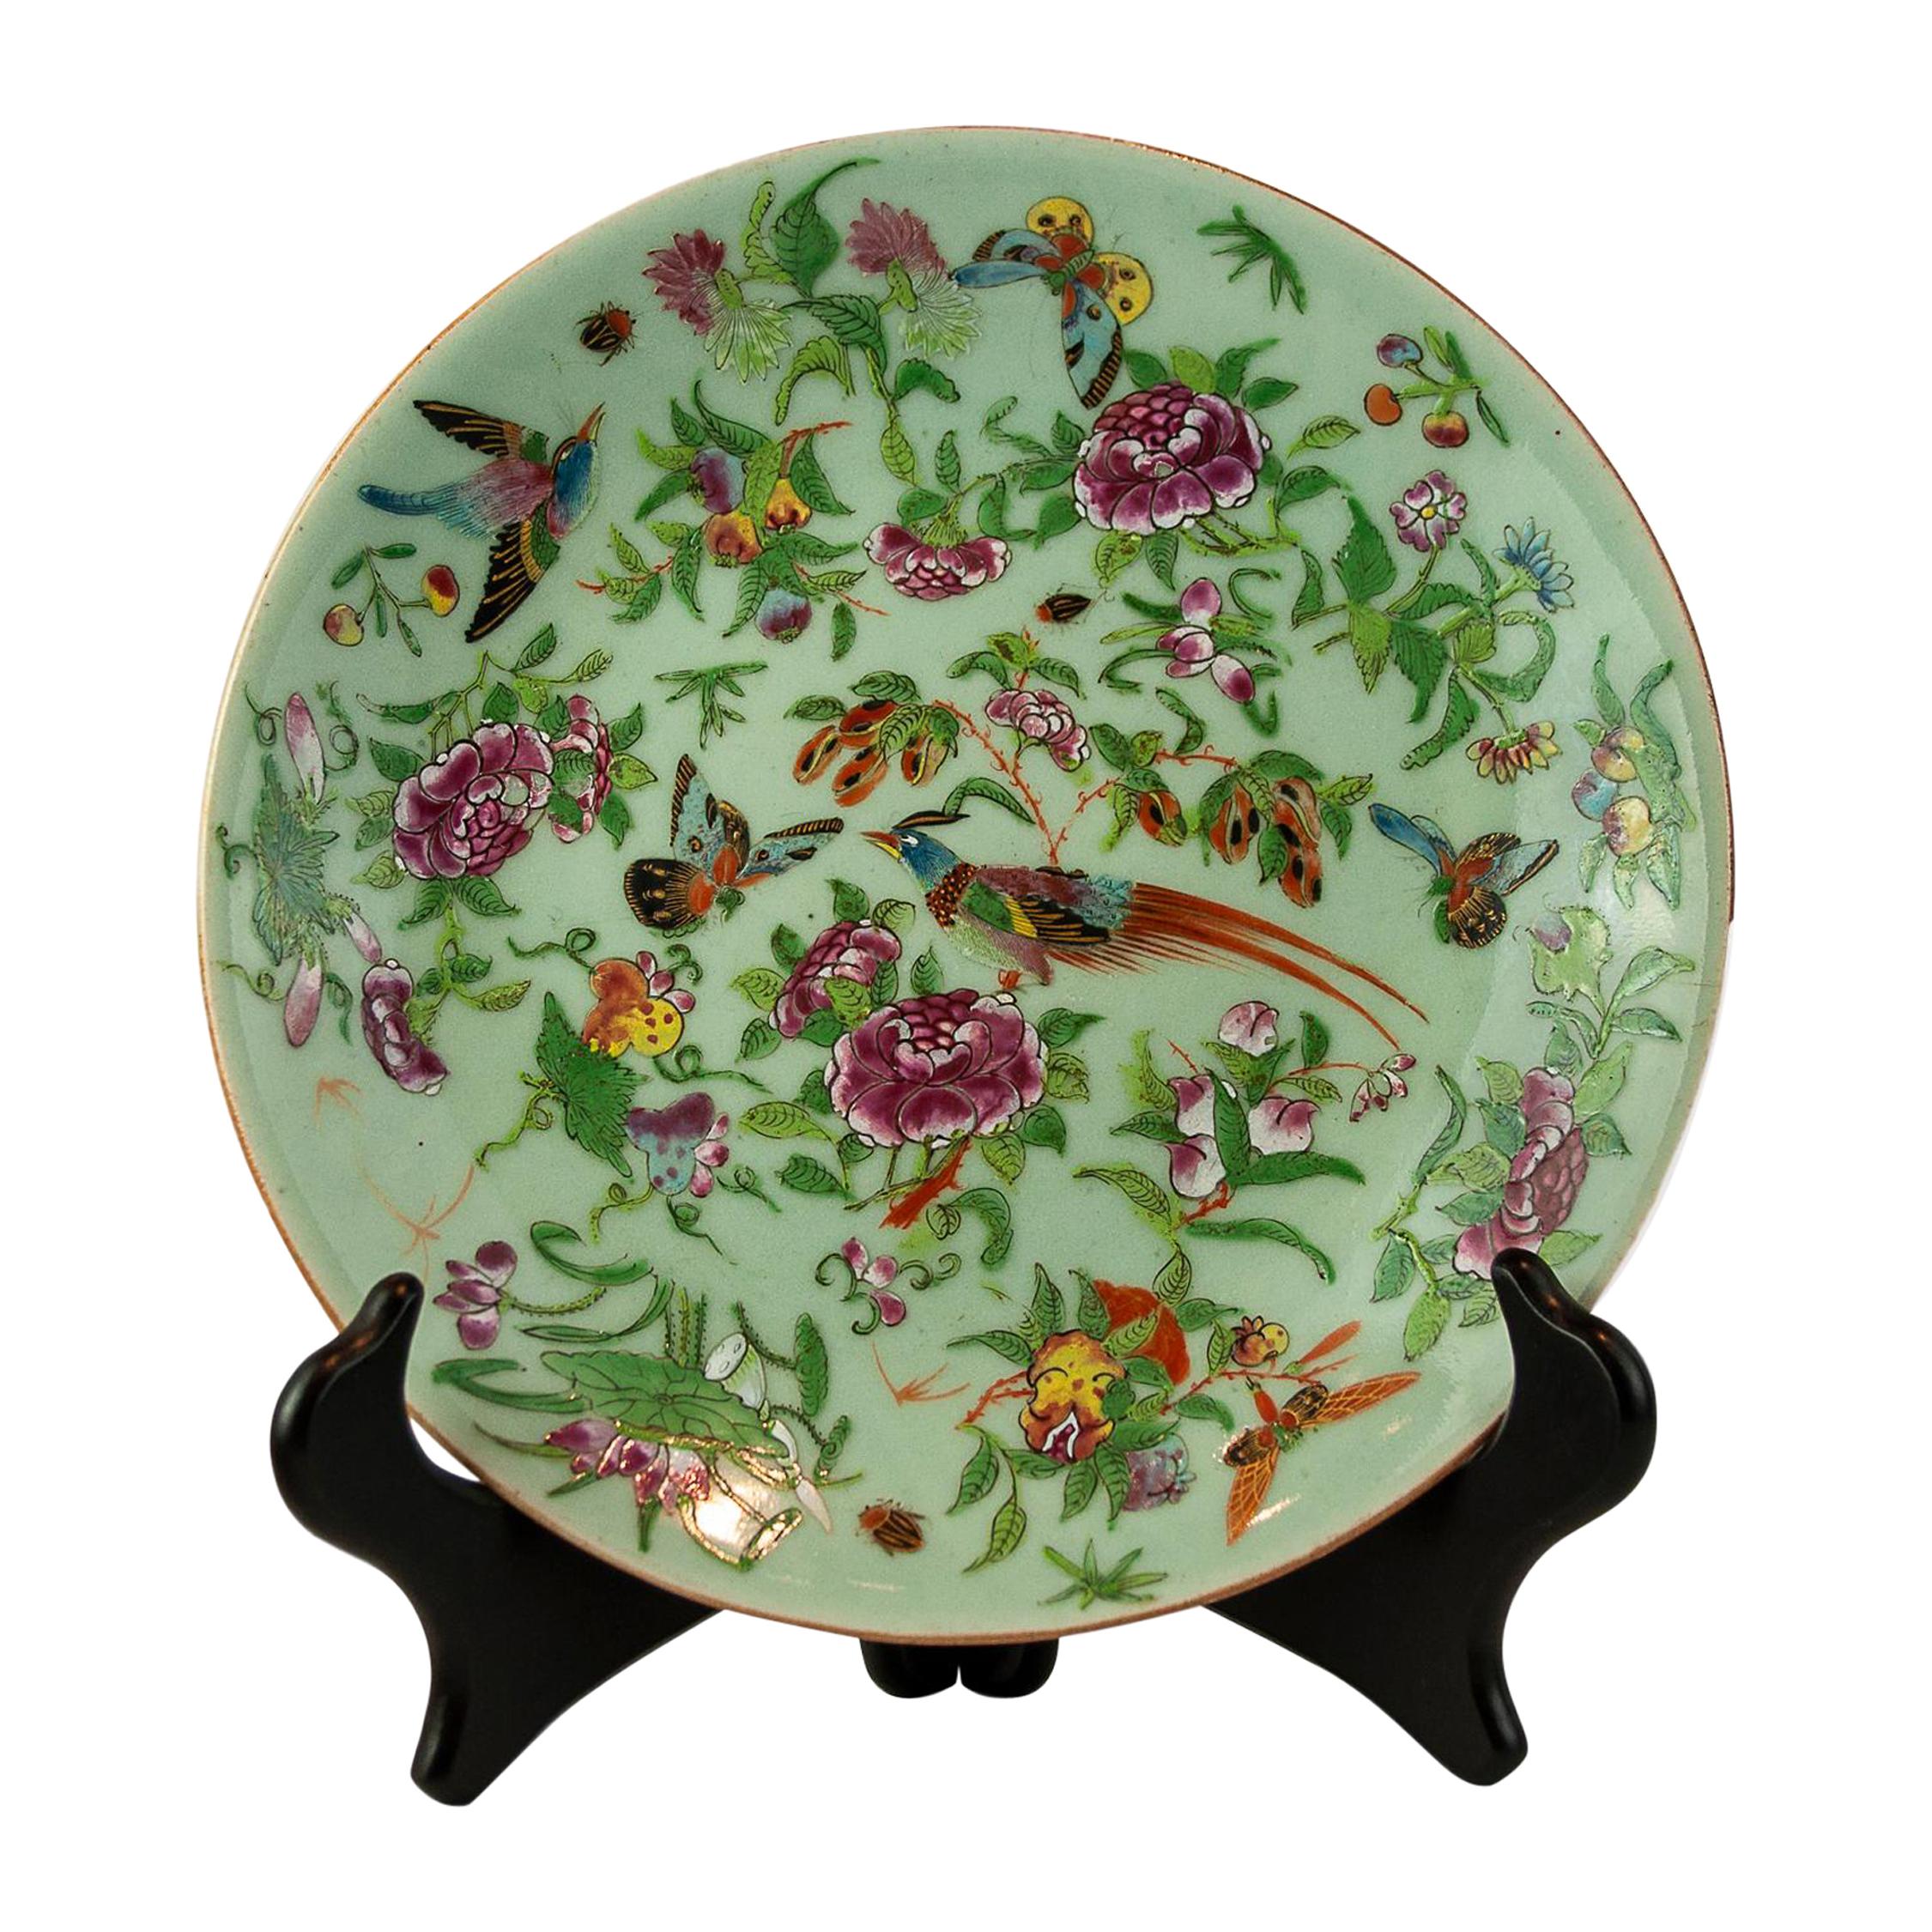 Chinese Celadon Famille Rose Plate, Canton, ca. 1850